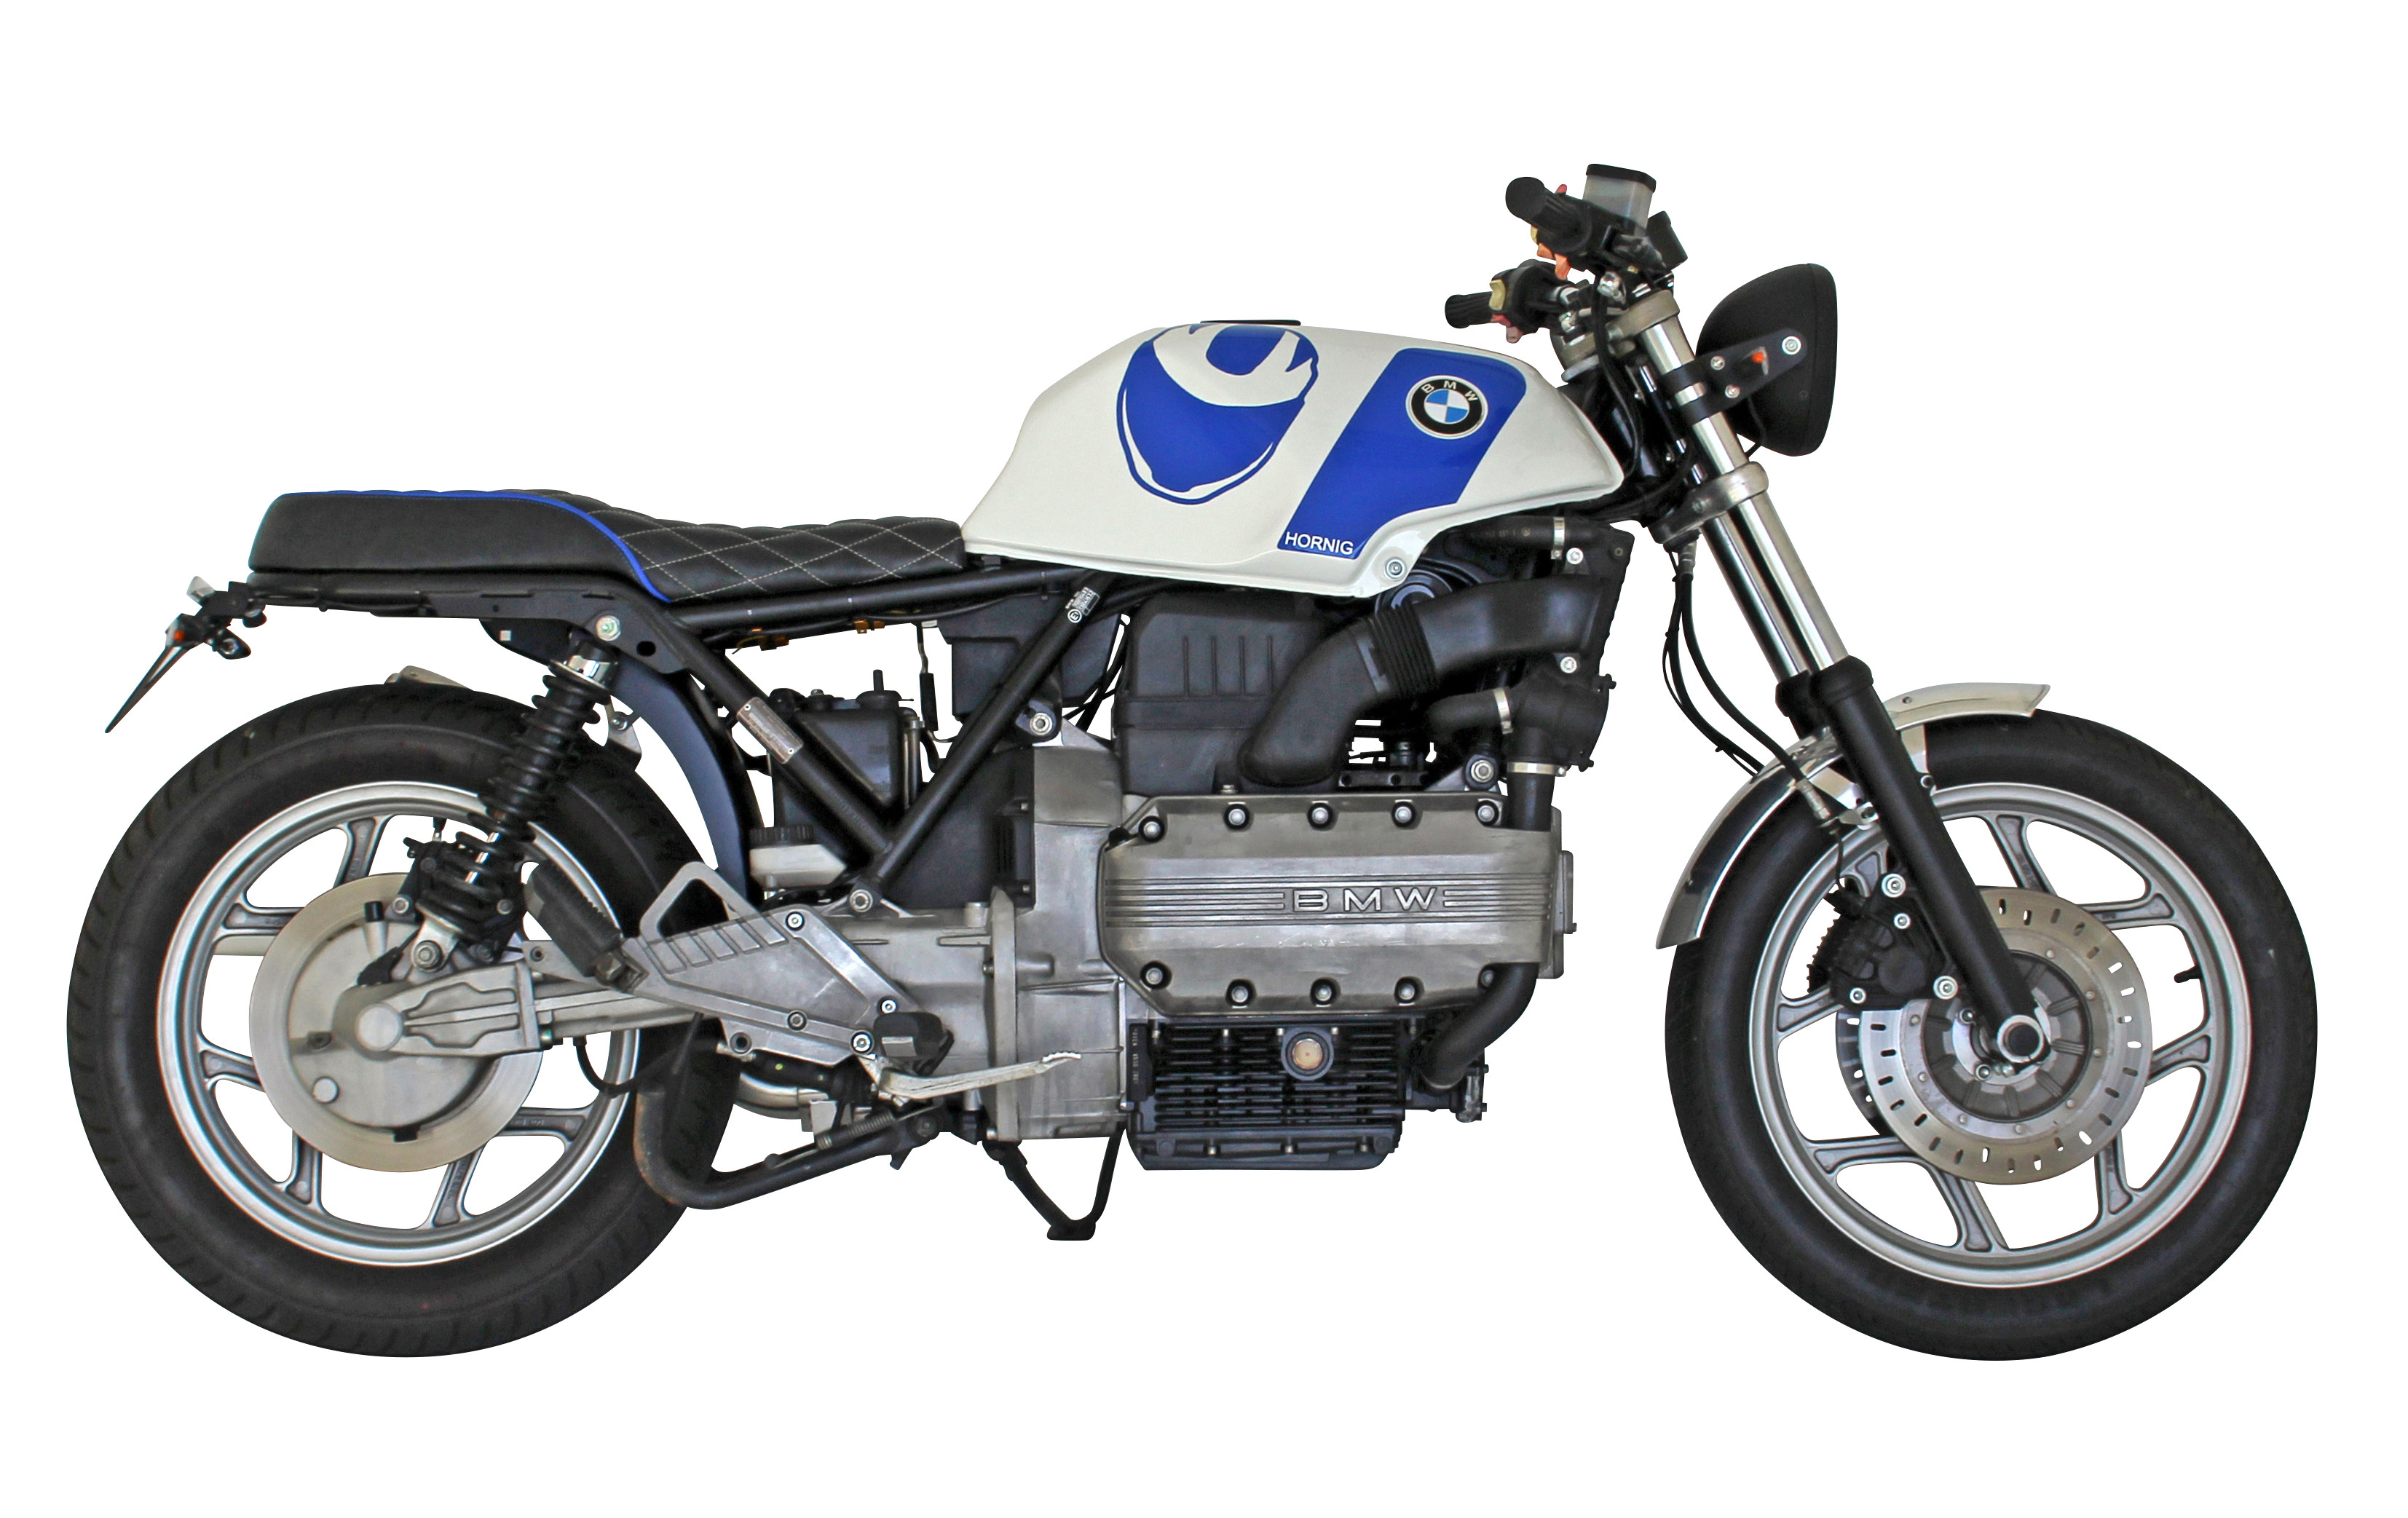 Bmw K100rs Cafe Racer By Hornig Trendy Retro Look With Tuv Approval Motorcycle Accessory Hornig Parts For Your Bmw Motorrad